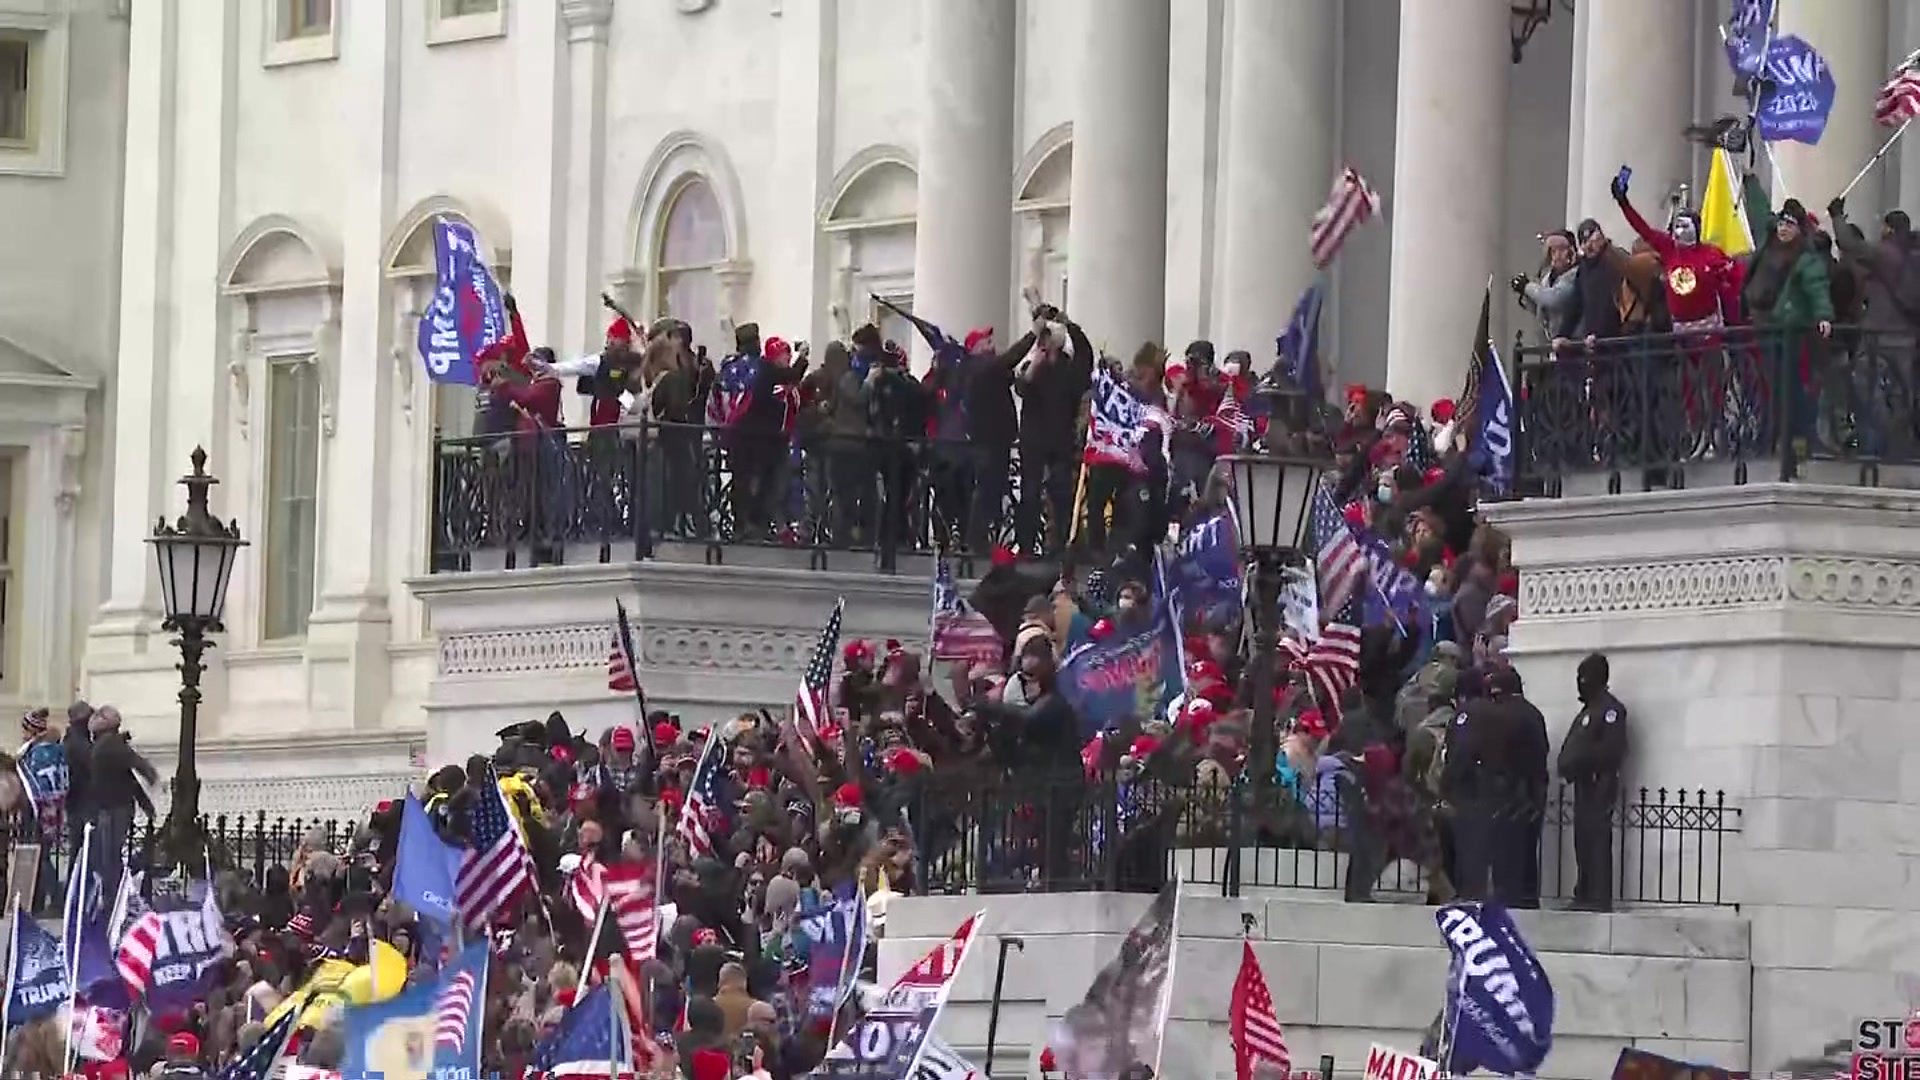 Moment protesters storm US Capitol Building